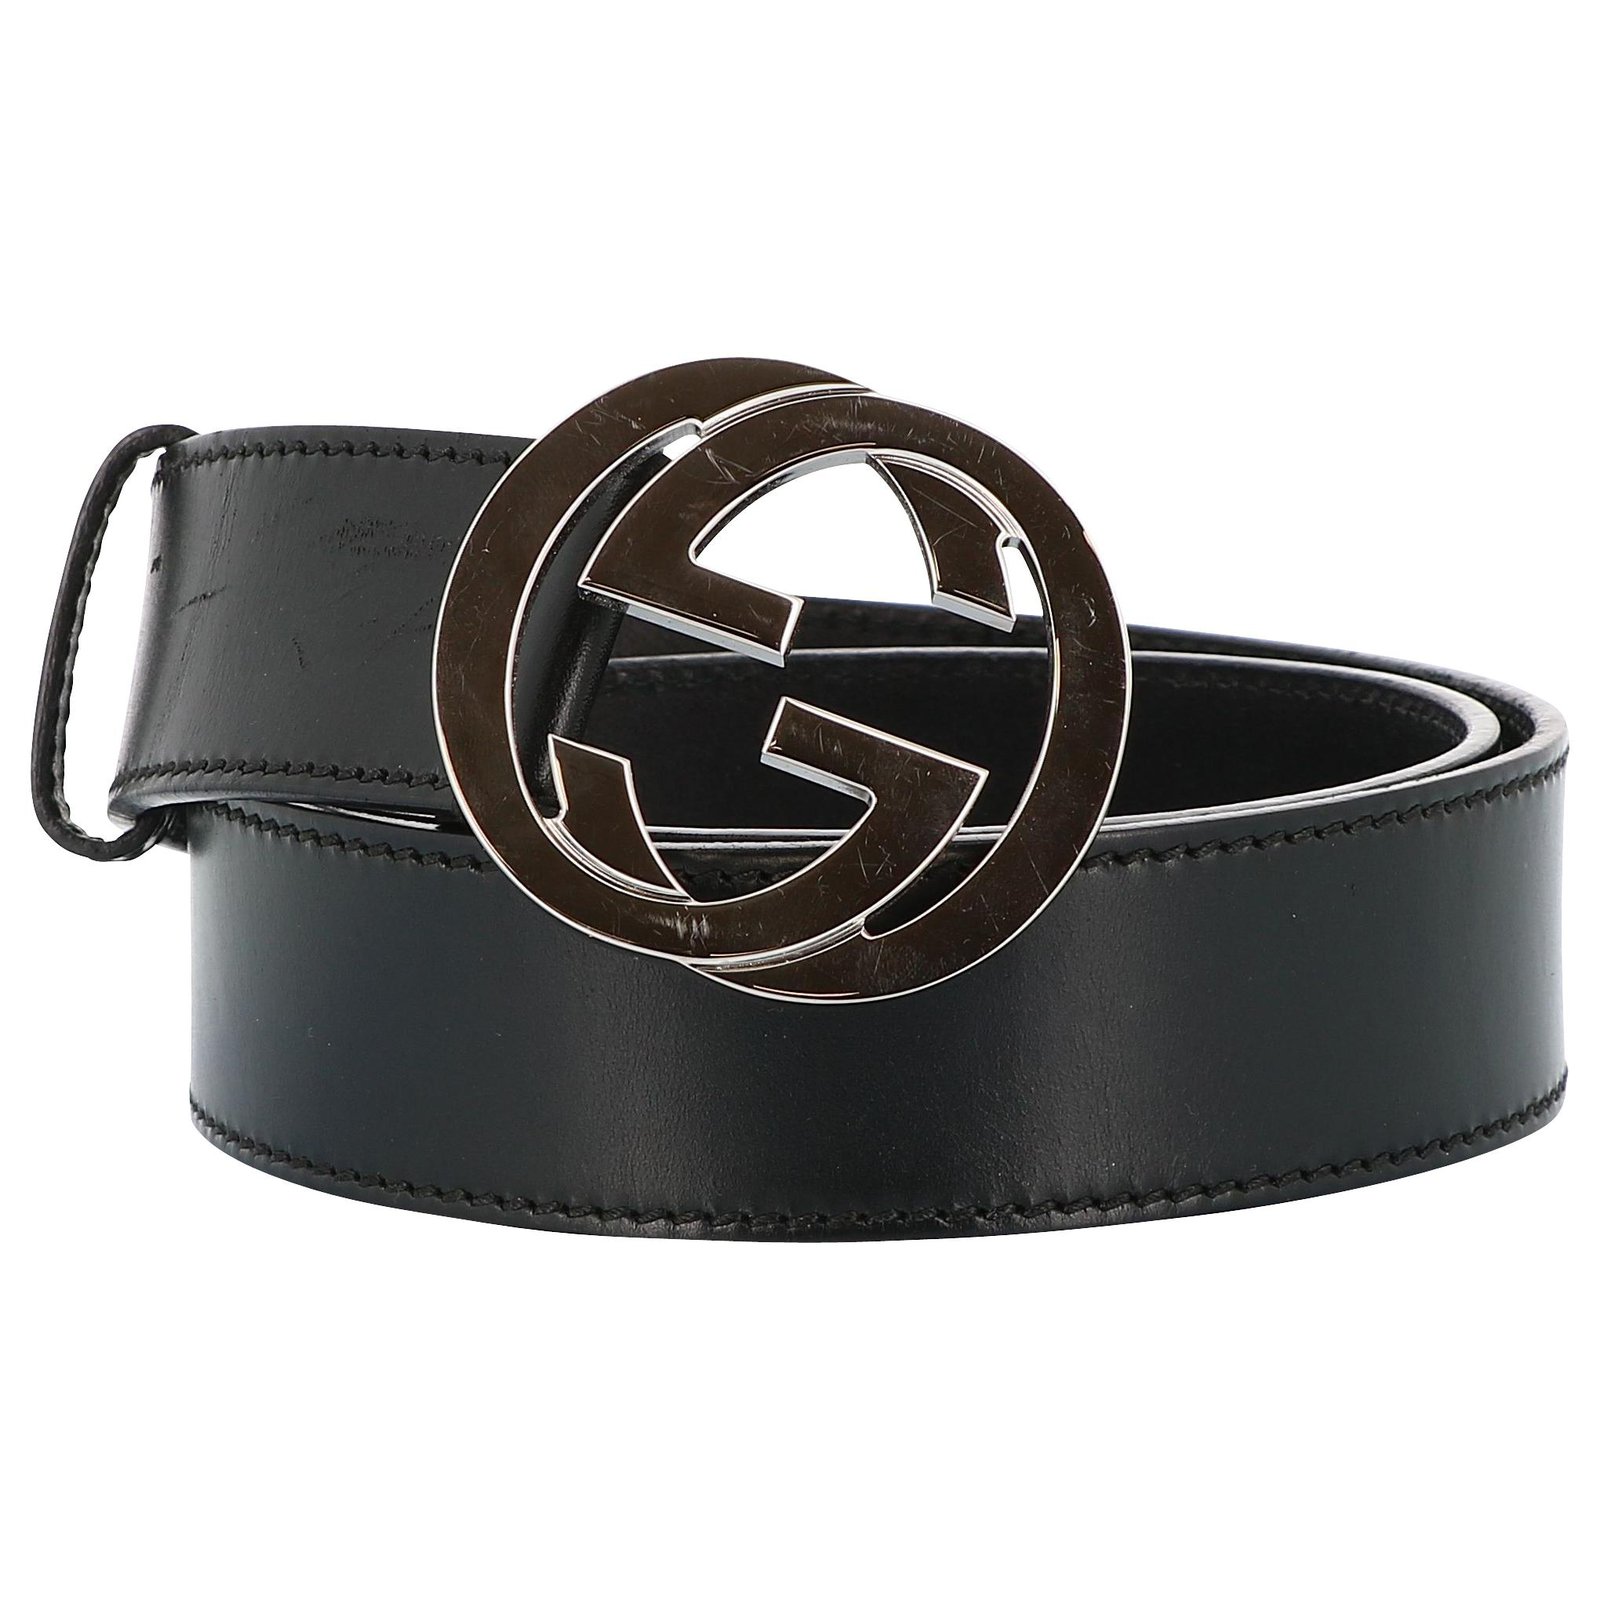 what is a gucci belt